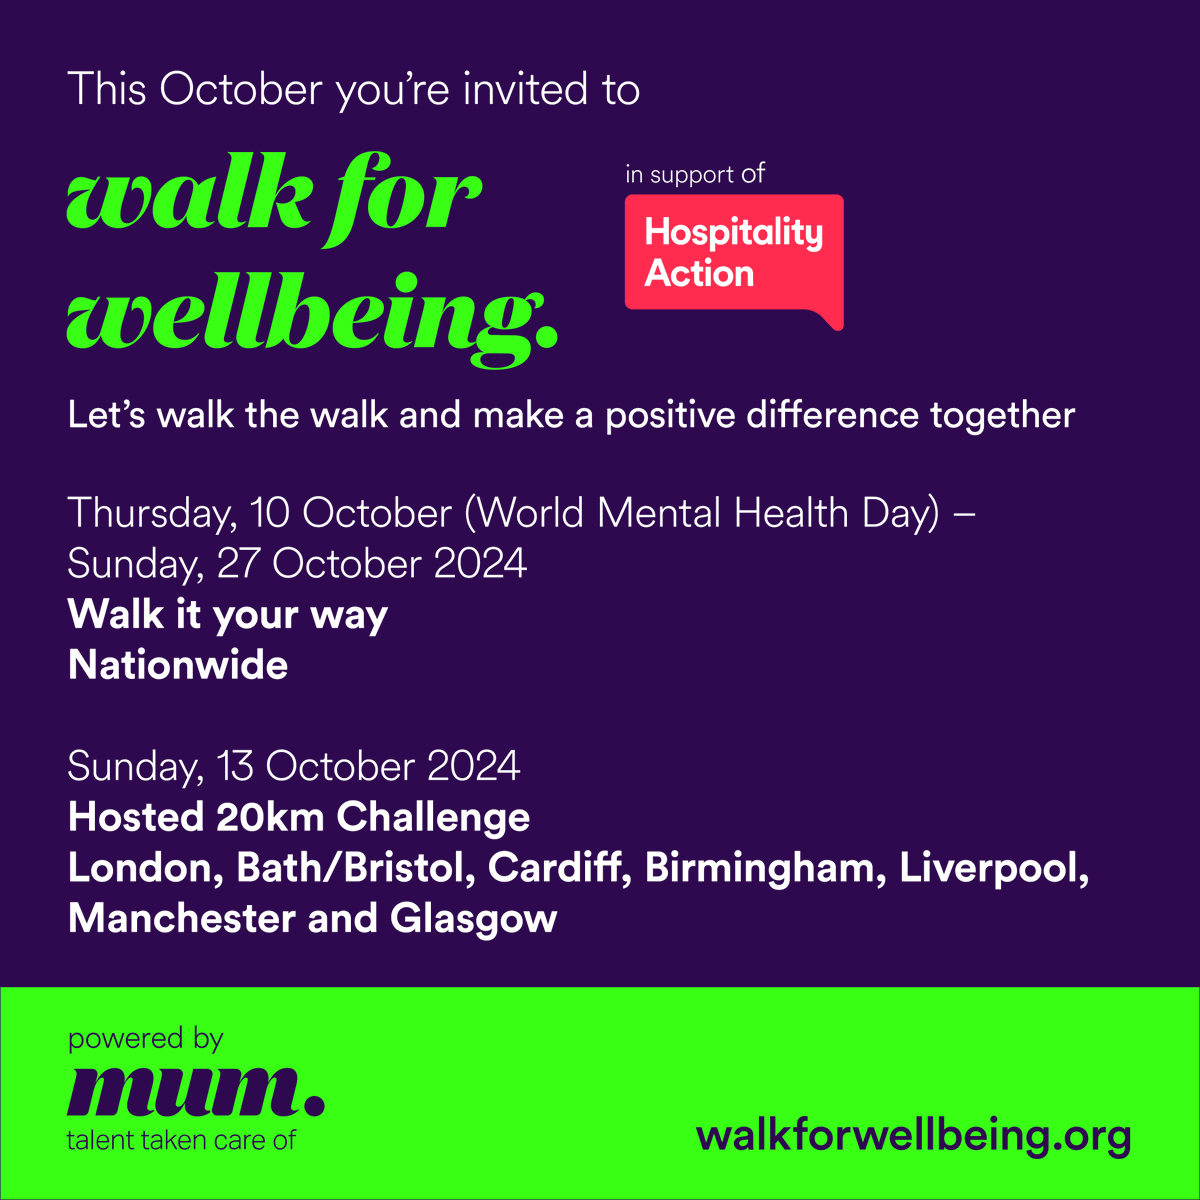 1 in 2 calls made to the HA helpline are from people with mental health challenges. You can make a positive difference by raising awareness & funds to support the wellbeing of everyone in hospitality. Join Walk for Wellbeing at walkforwellbeing.org #mum @Catererdotcom